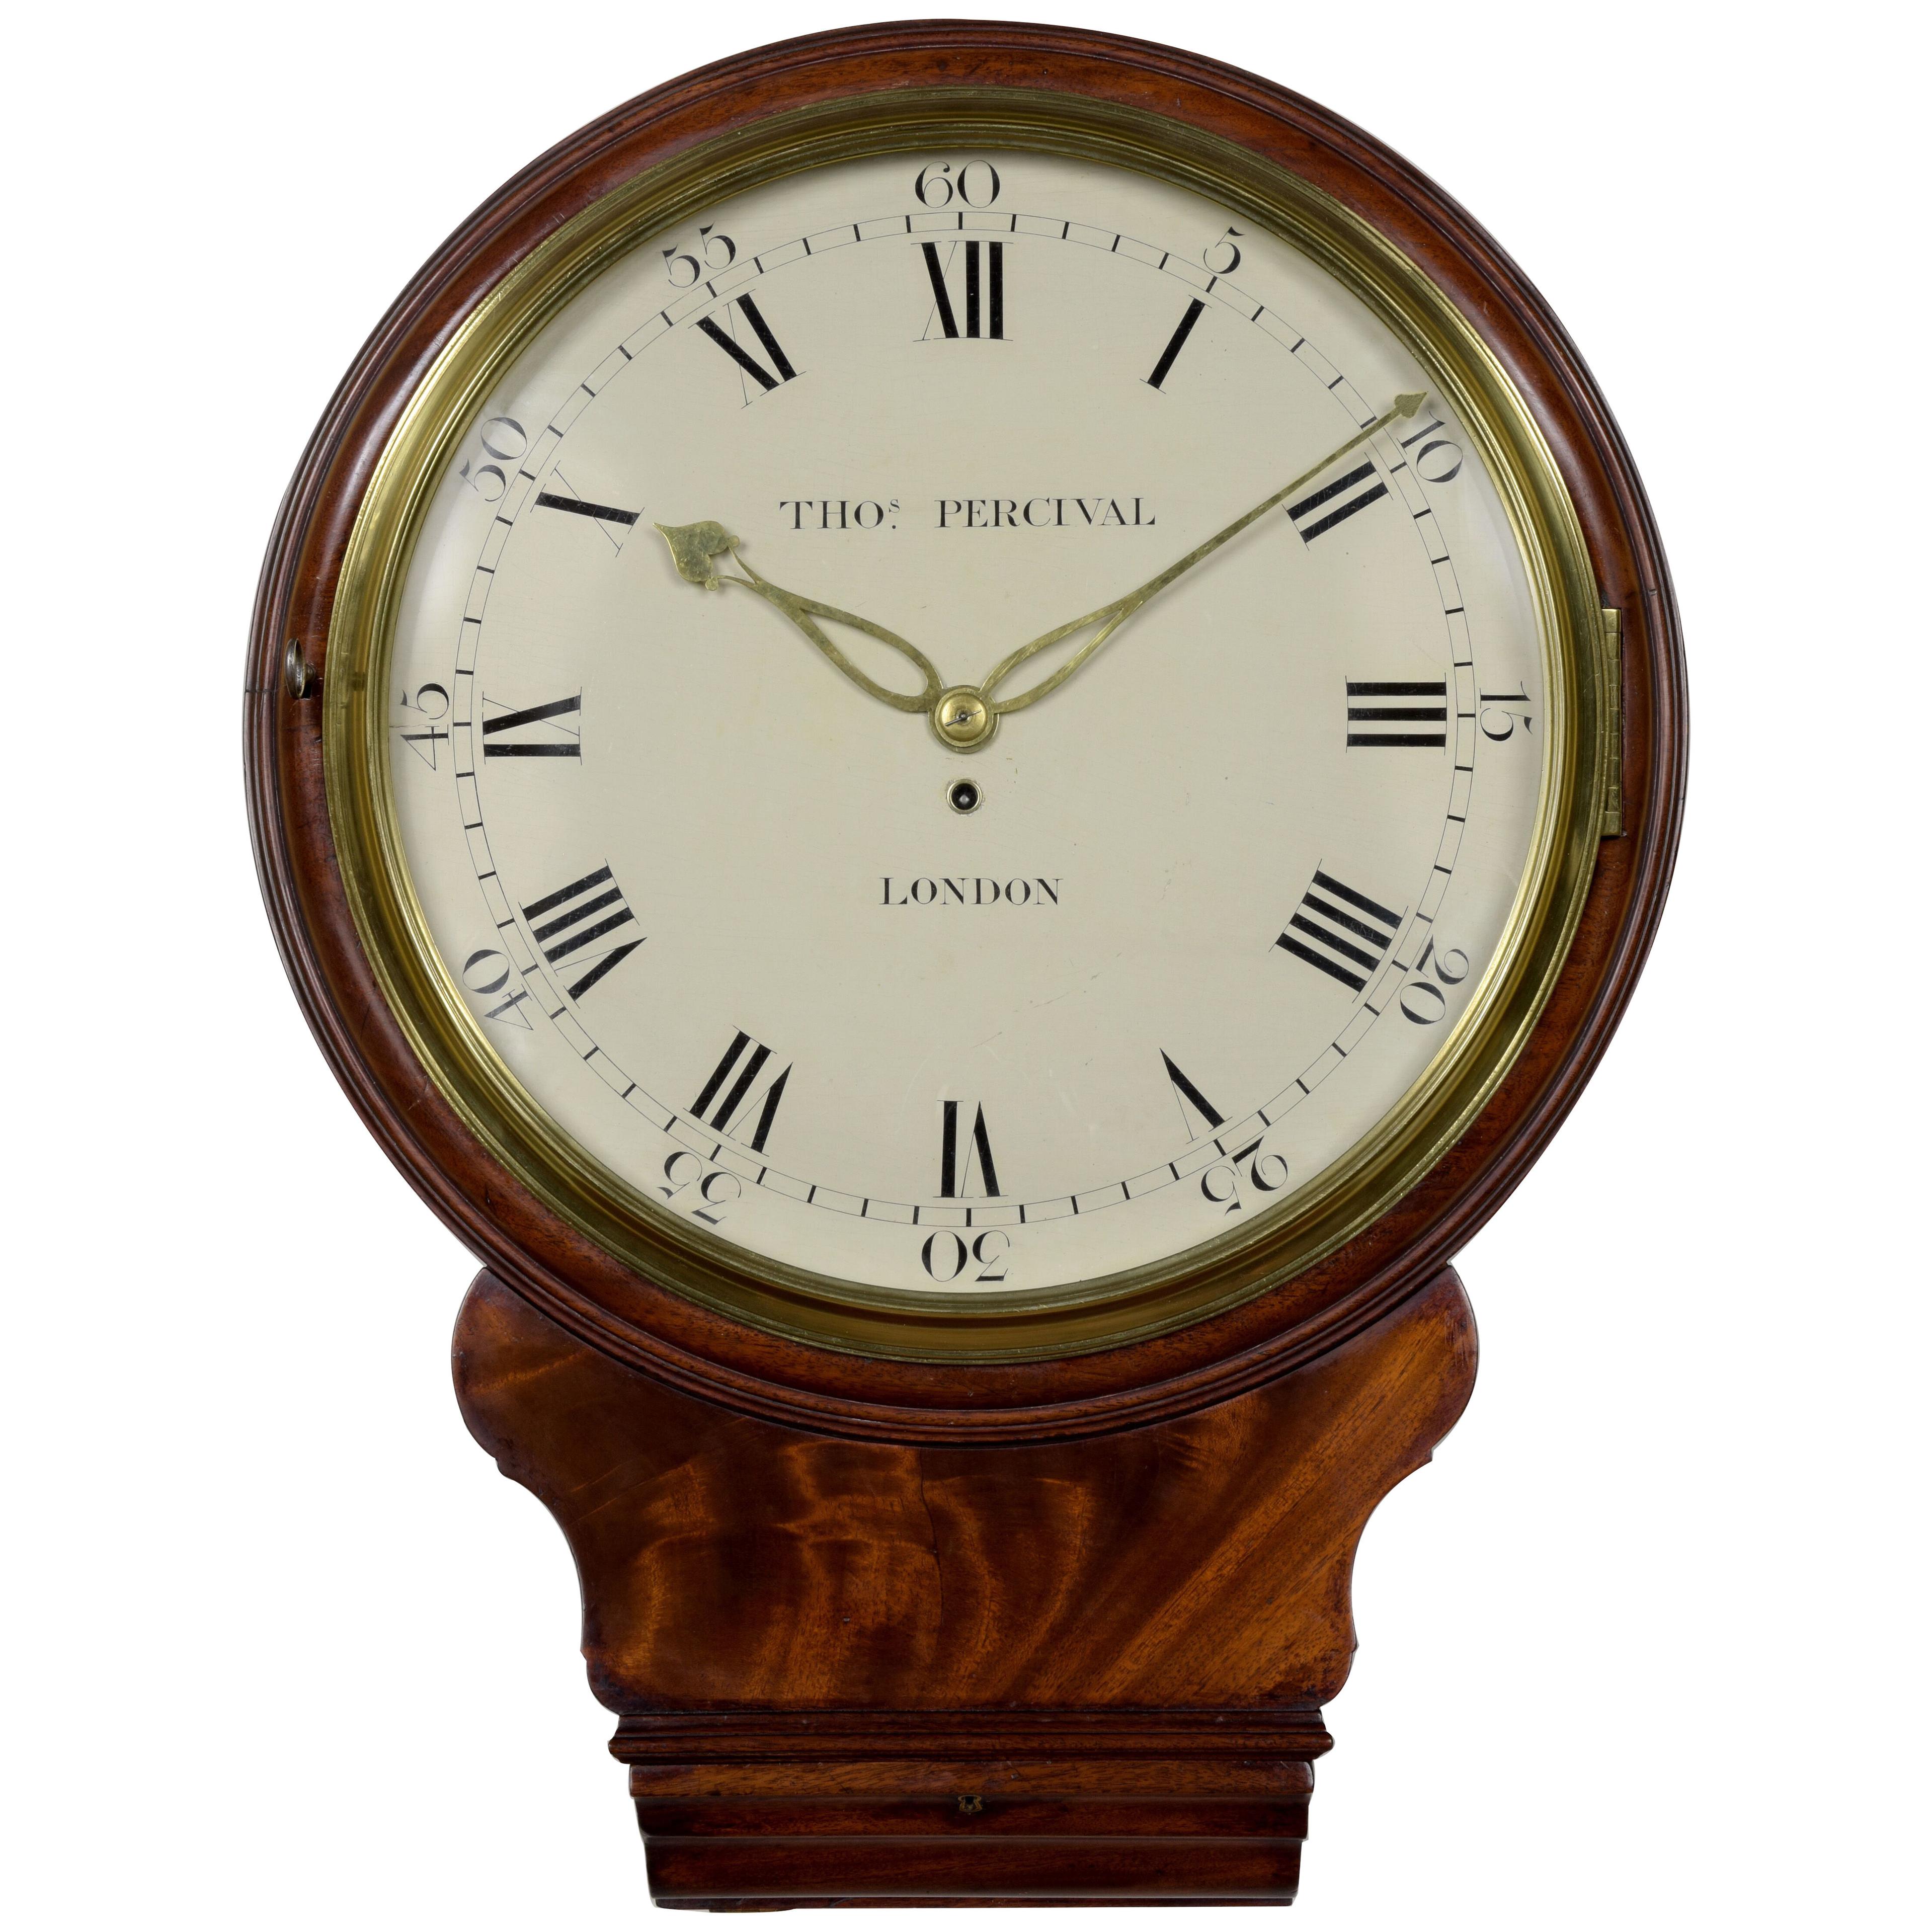 THOS. PERCIVAL, London. AN EARLY 19TH CENTURY DROP DIAL WALL CLOCK.